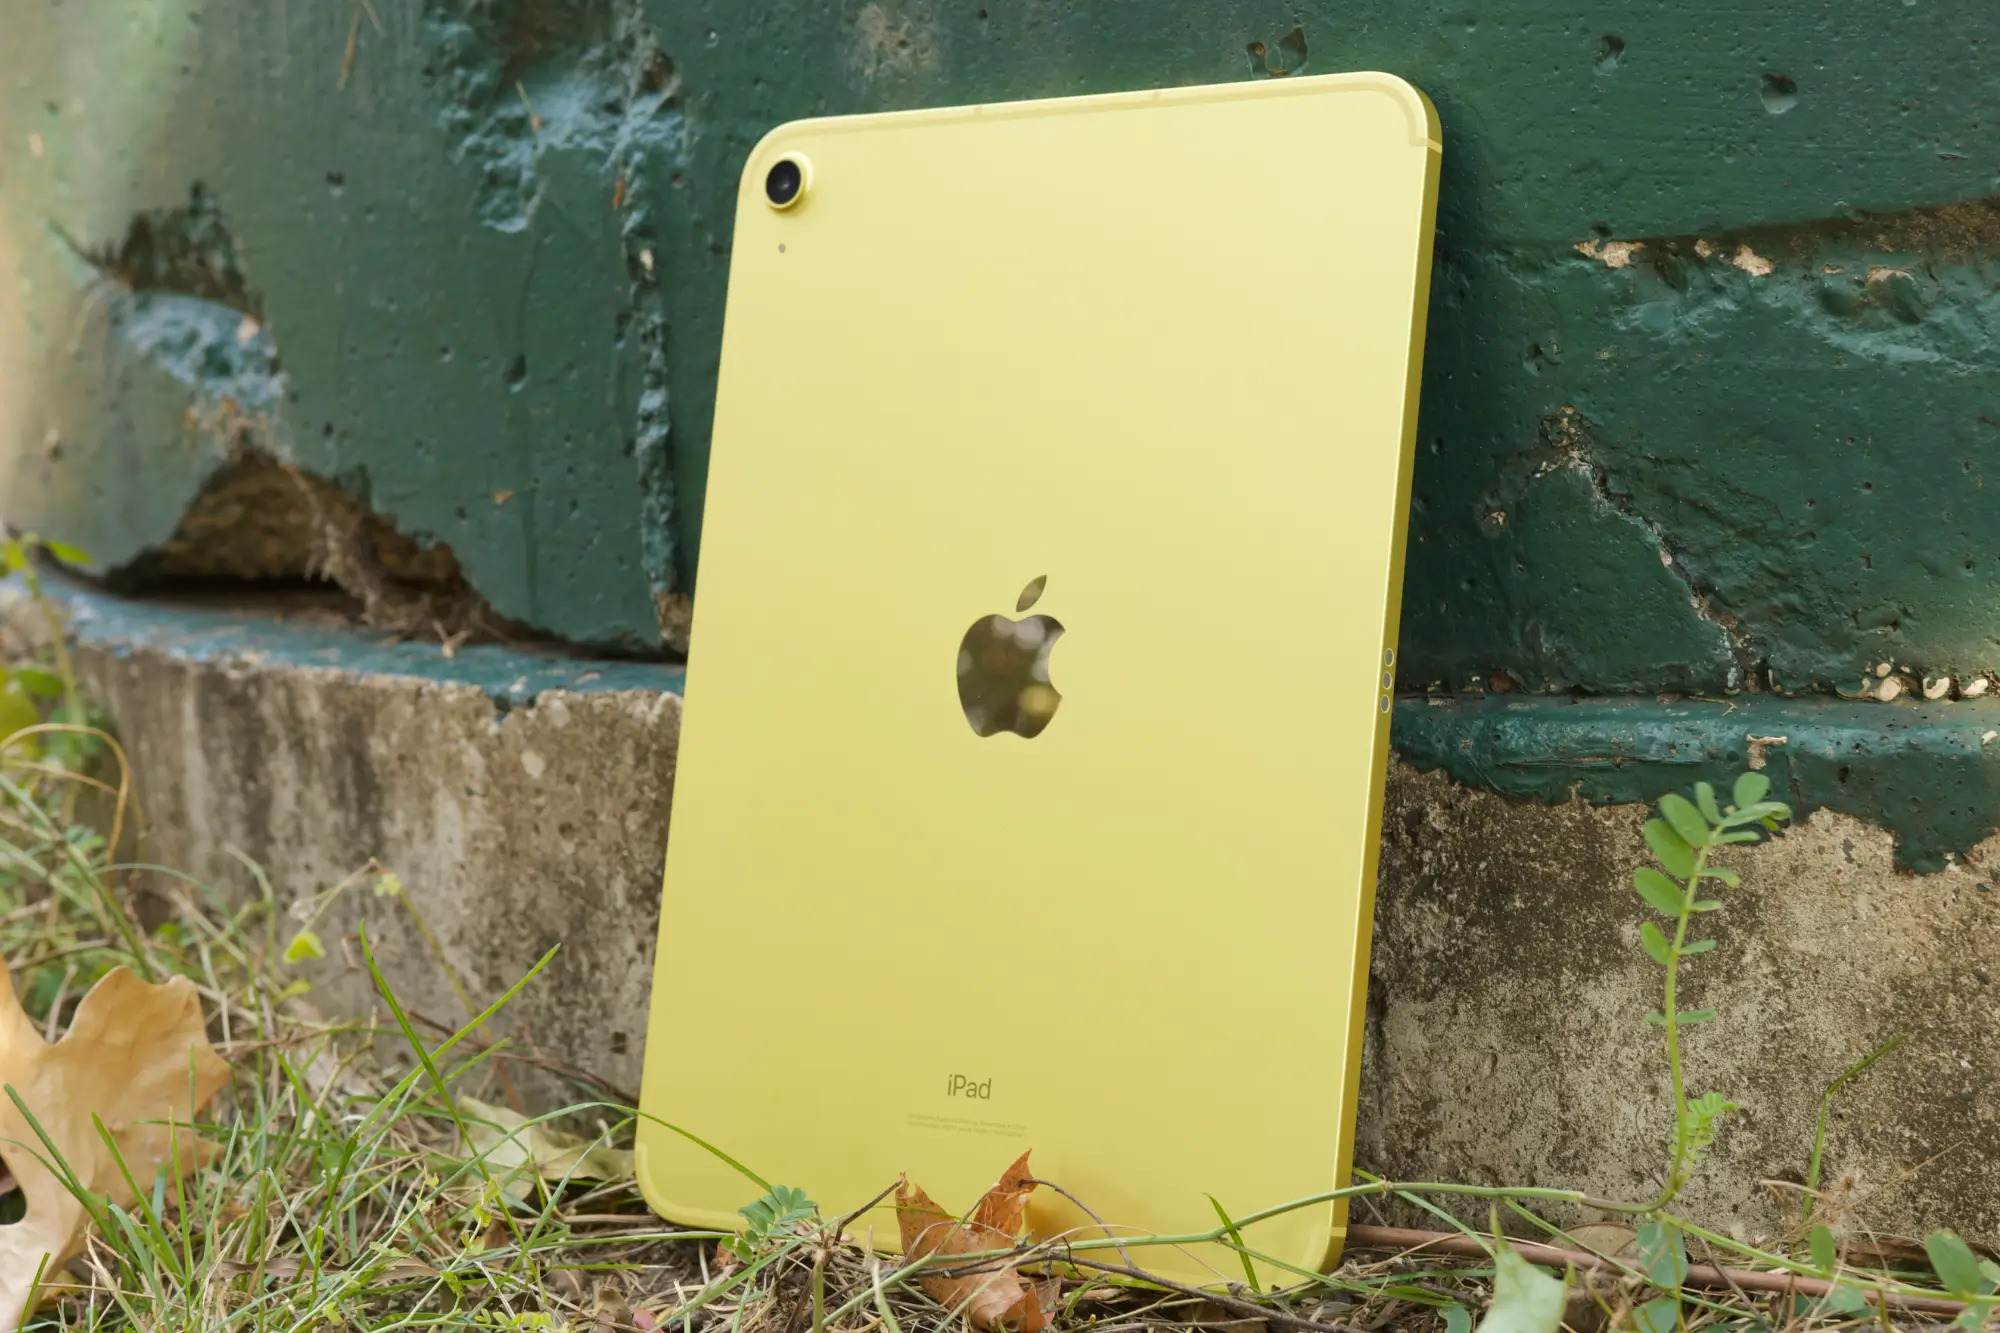 How To Factory Reset Apple Tablet Without Passcode